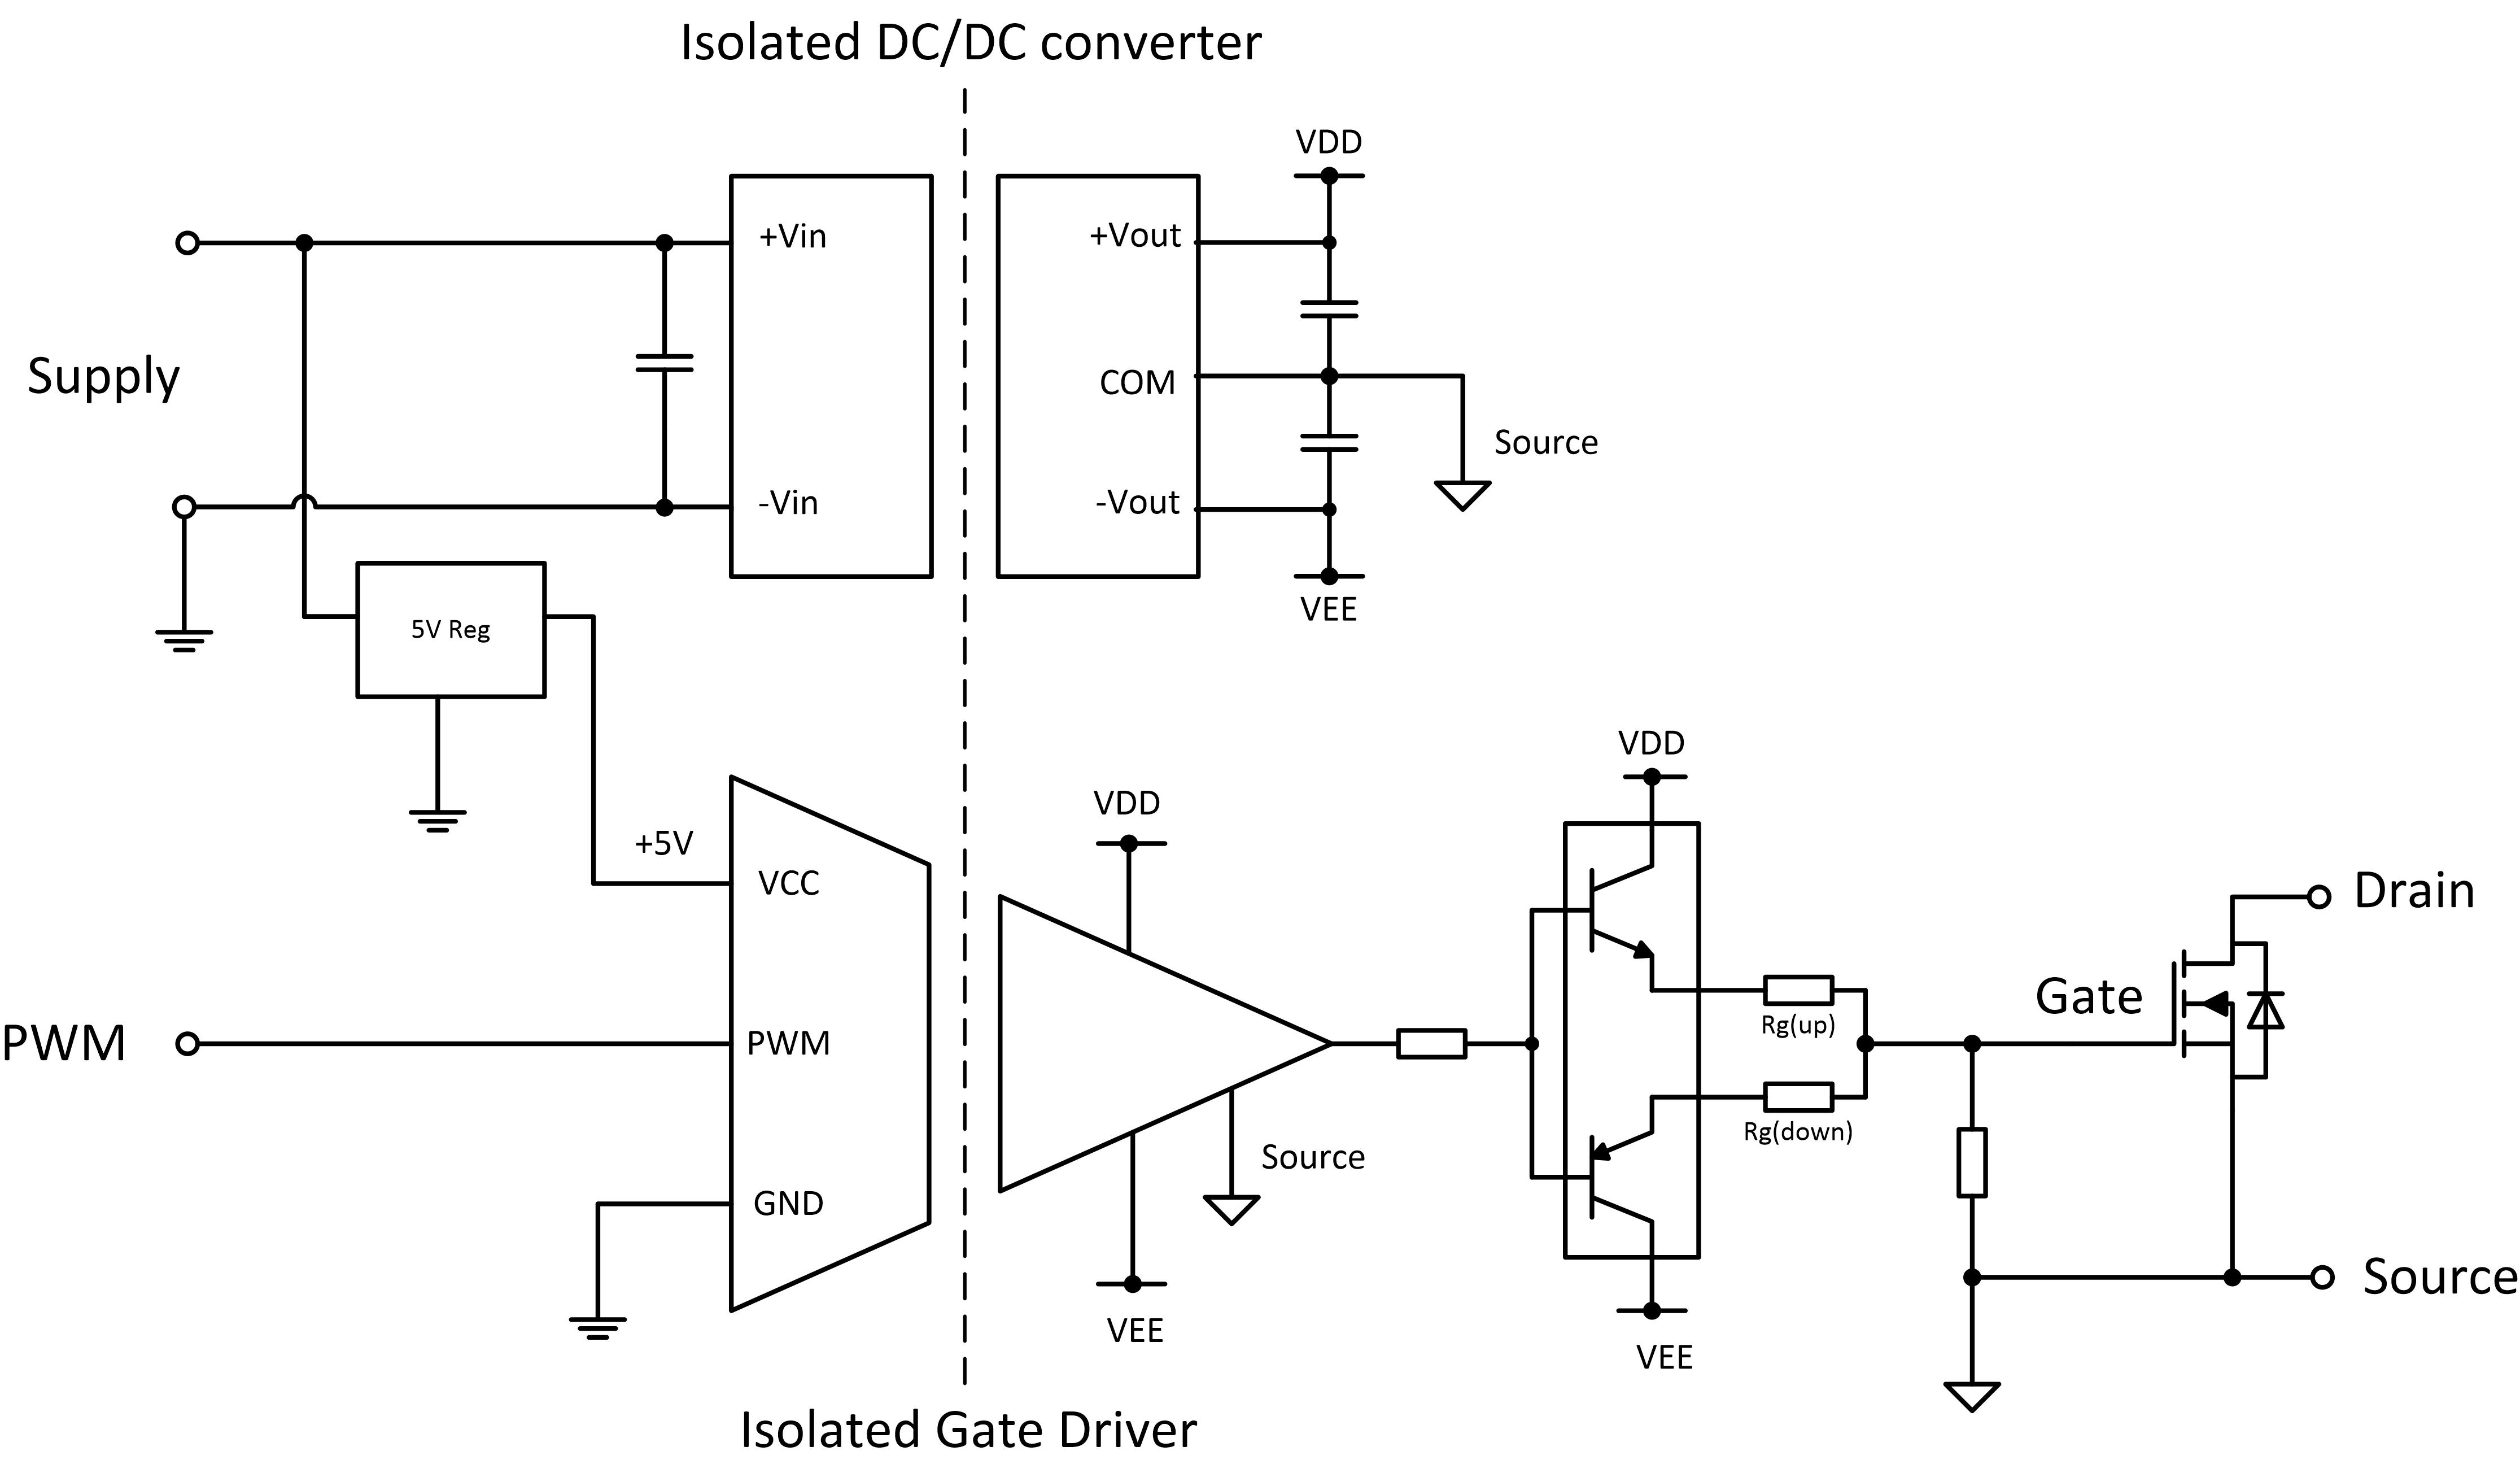 How to Hack your DC/DC Converter - Part 1